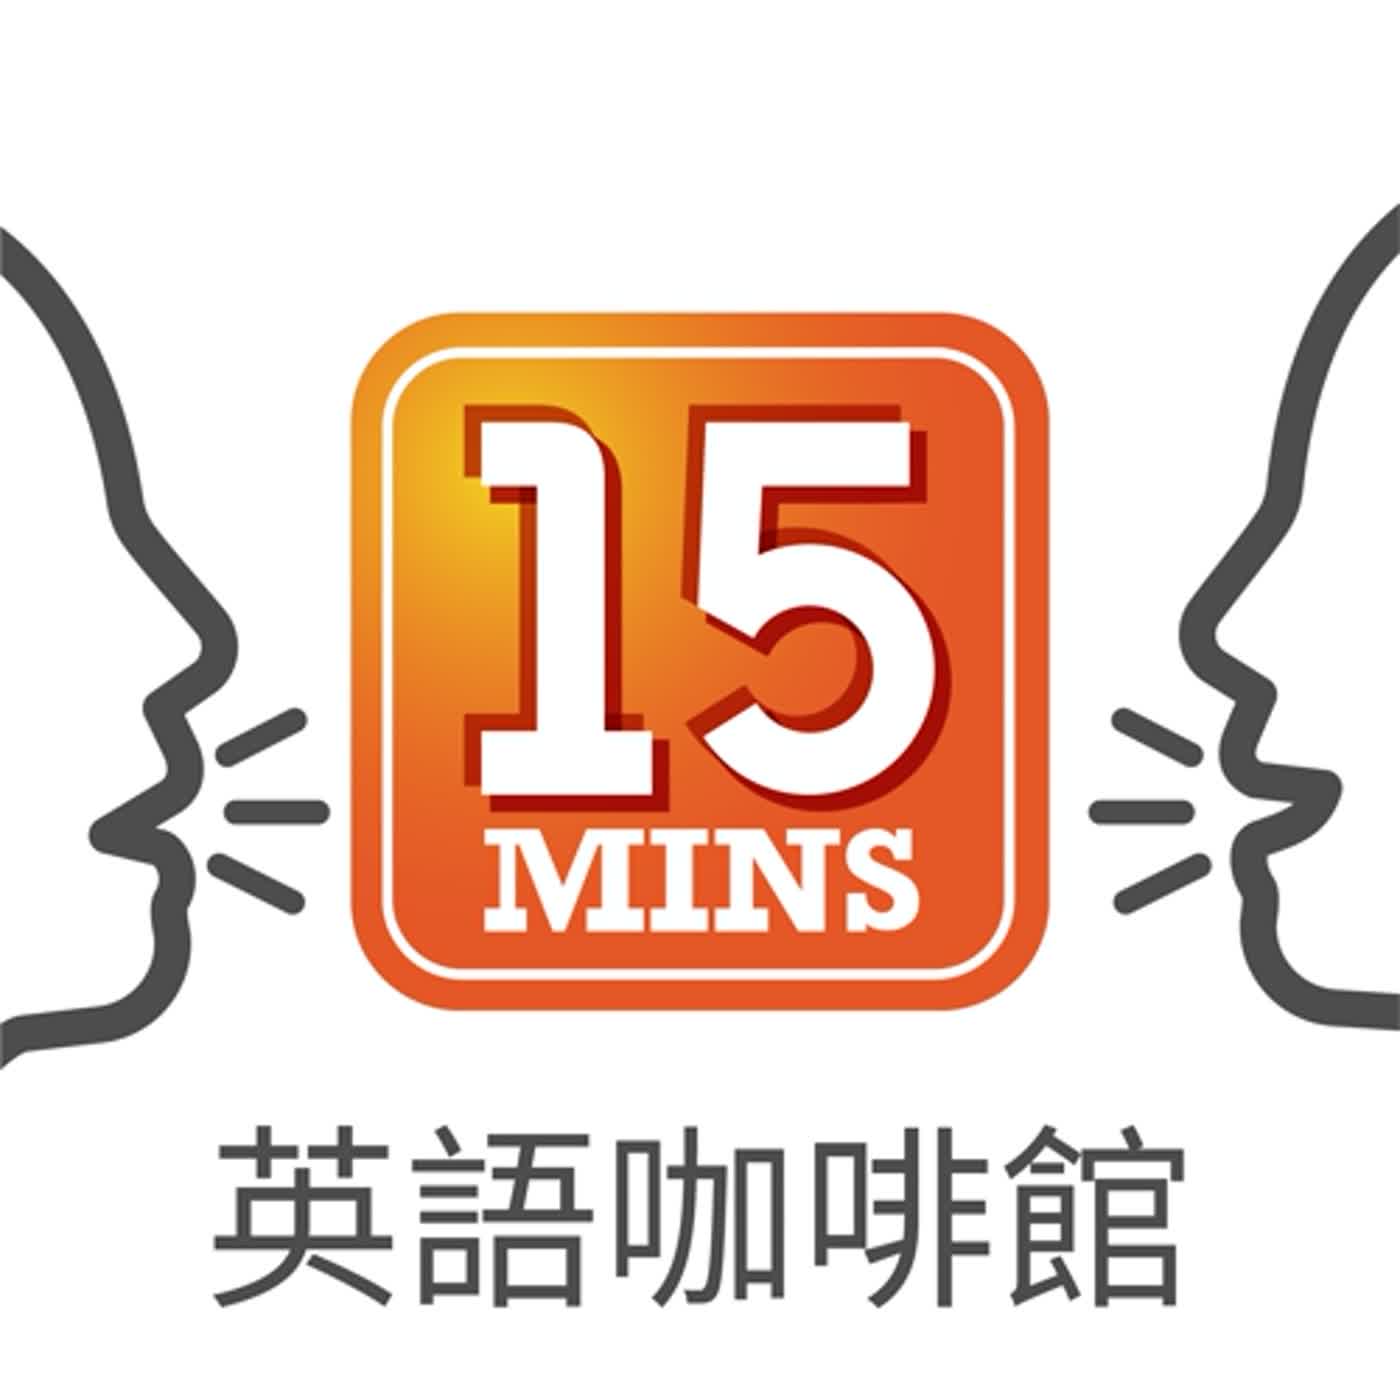 15Mins英語咖啡館 Ep.208: 白色情人節準備什麼樣的回禮是NG - What's the deal with White Day and what to do?